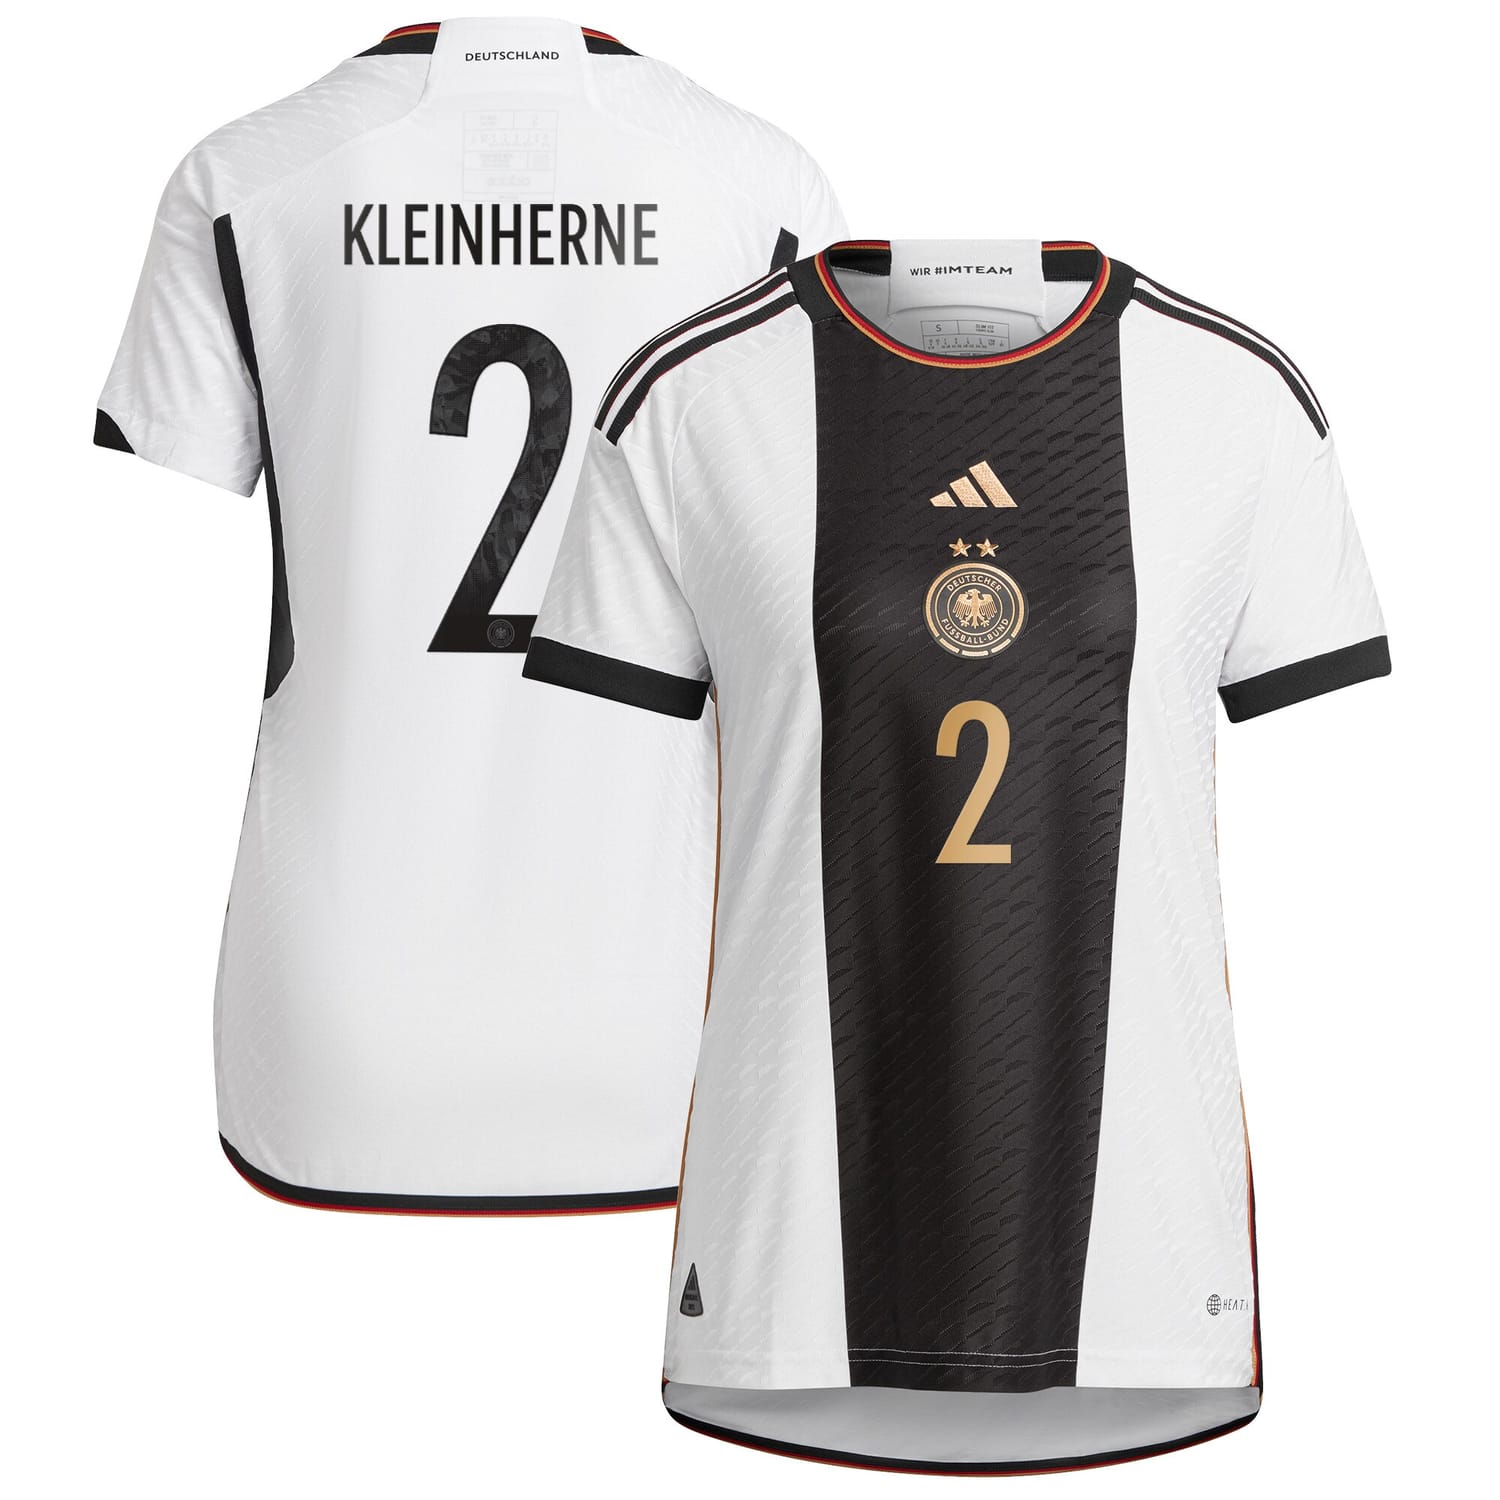 Germany National Team Home Authentic Jersey Shirt player Sophia Kleinherne 2 printing for Women